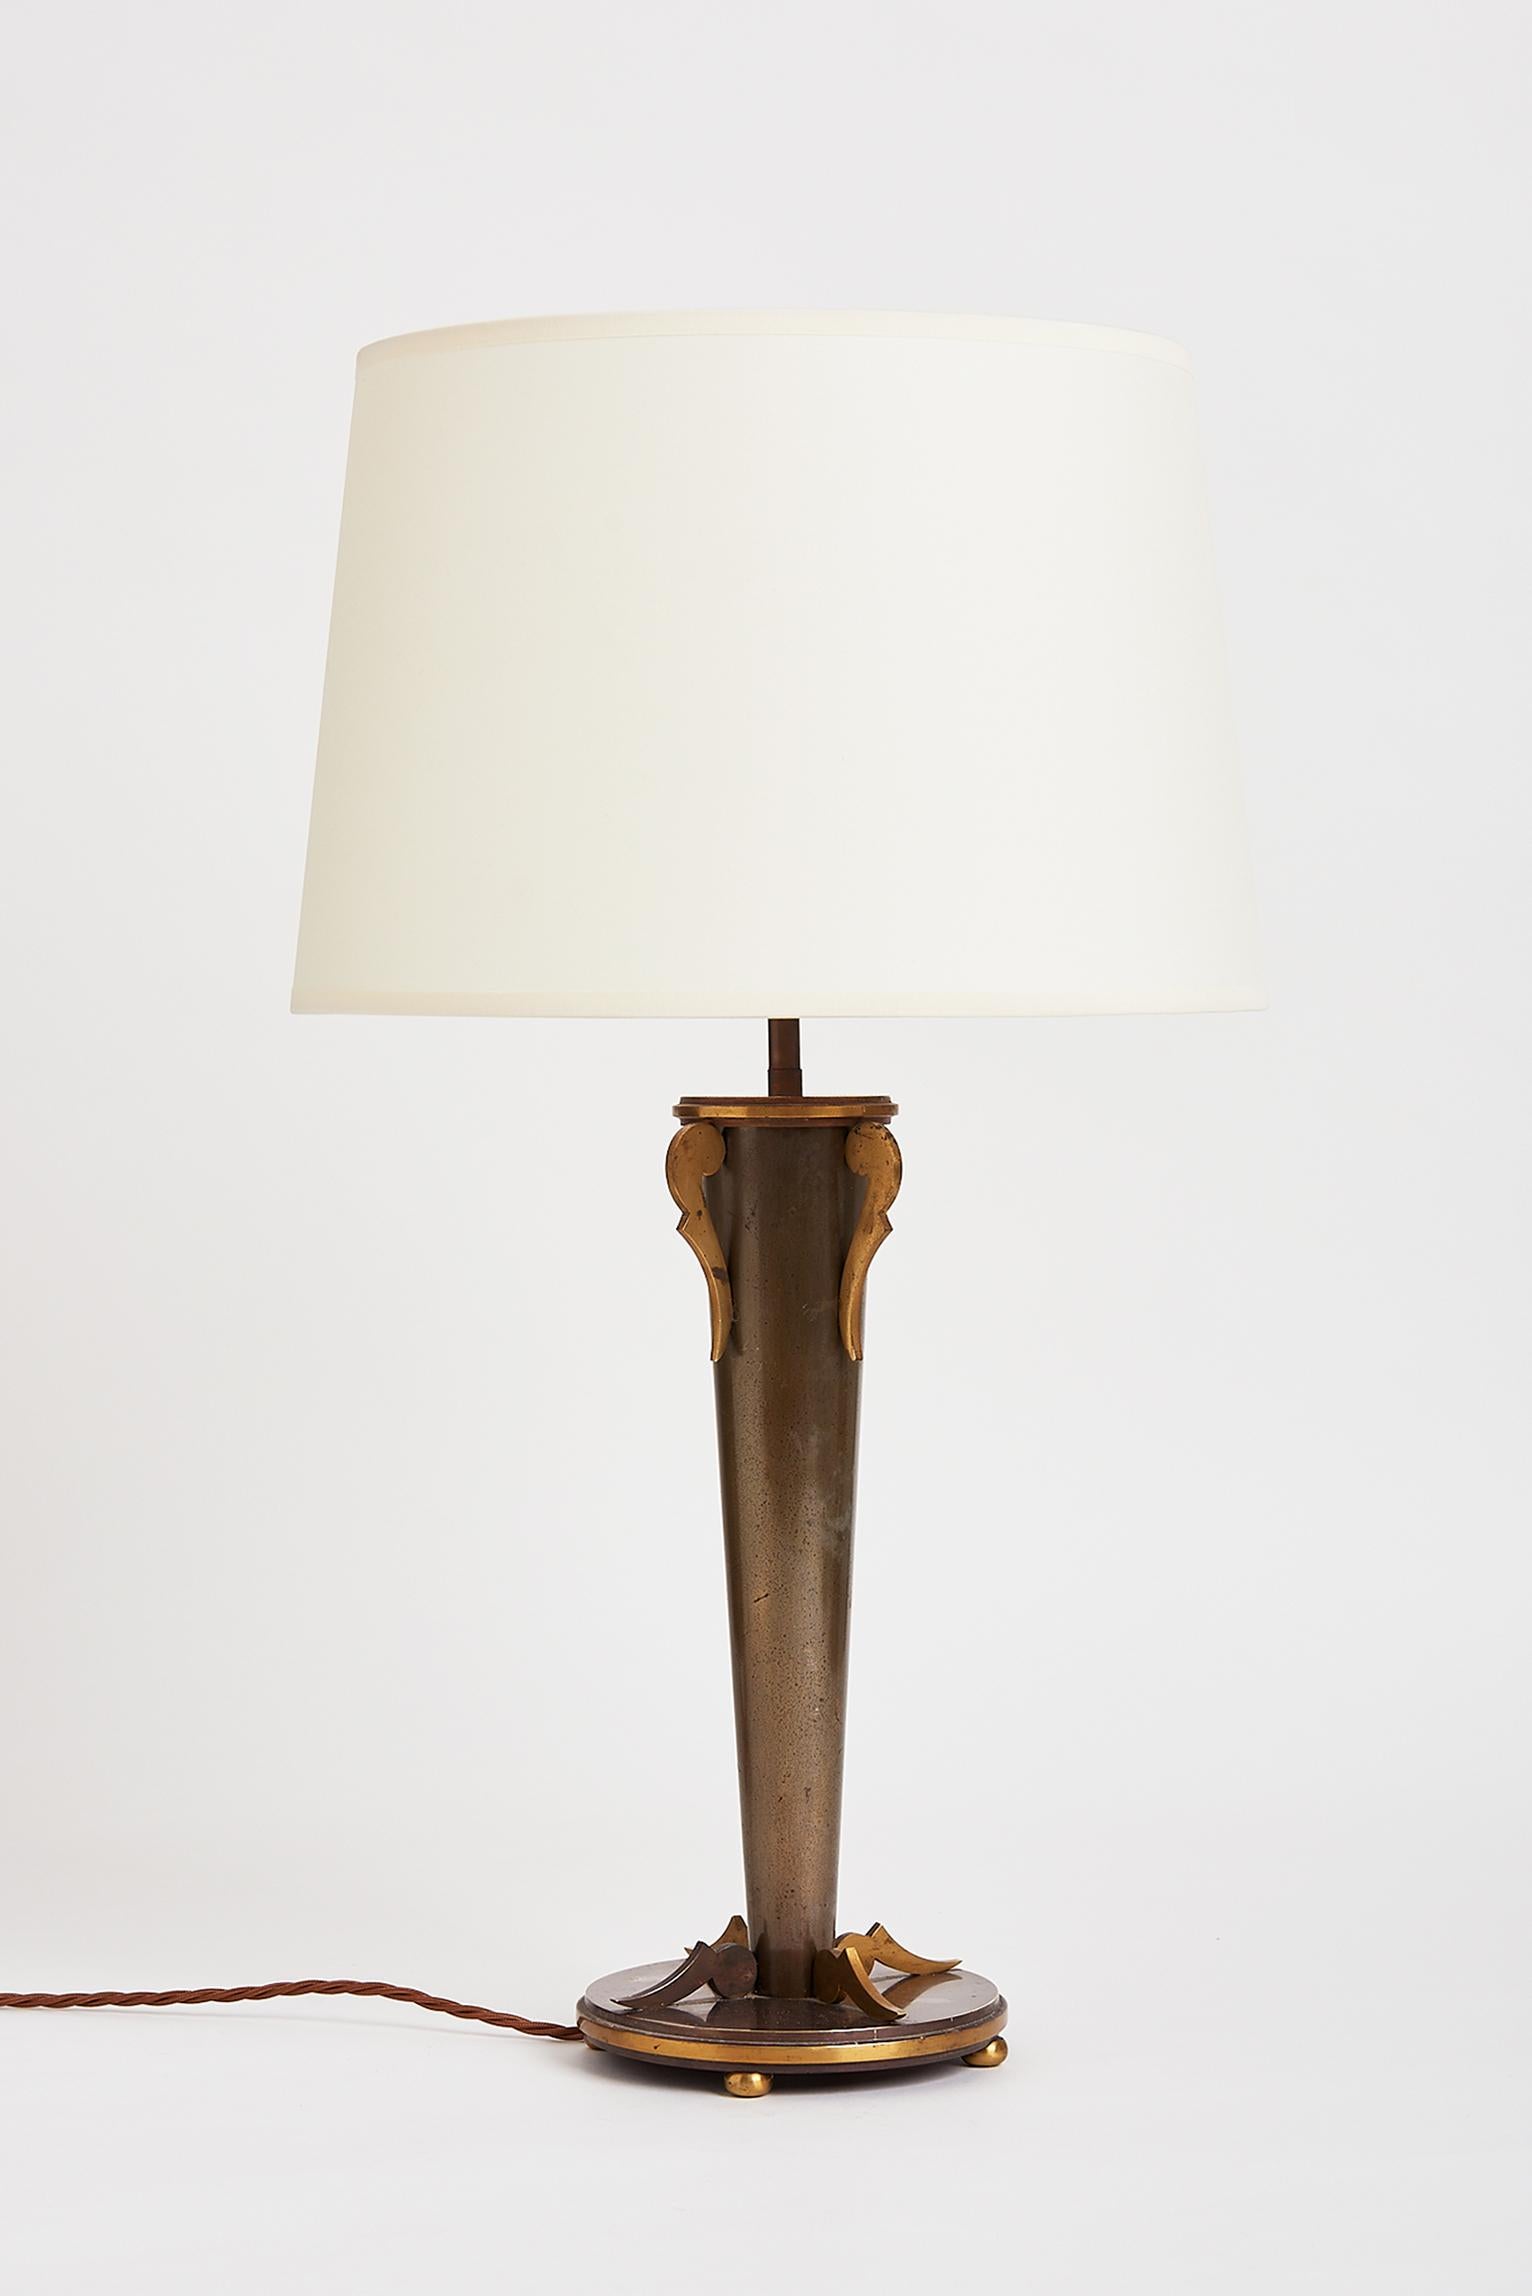 French Art Deco Brass Table Lamp